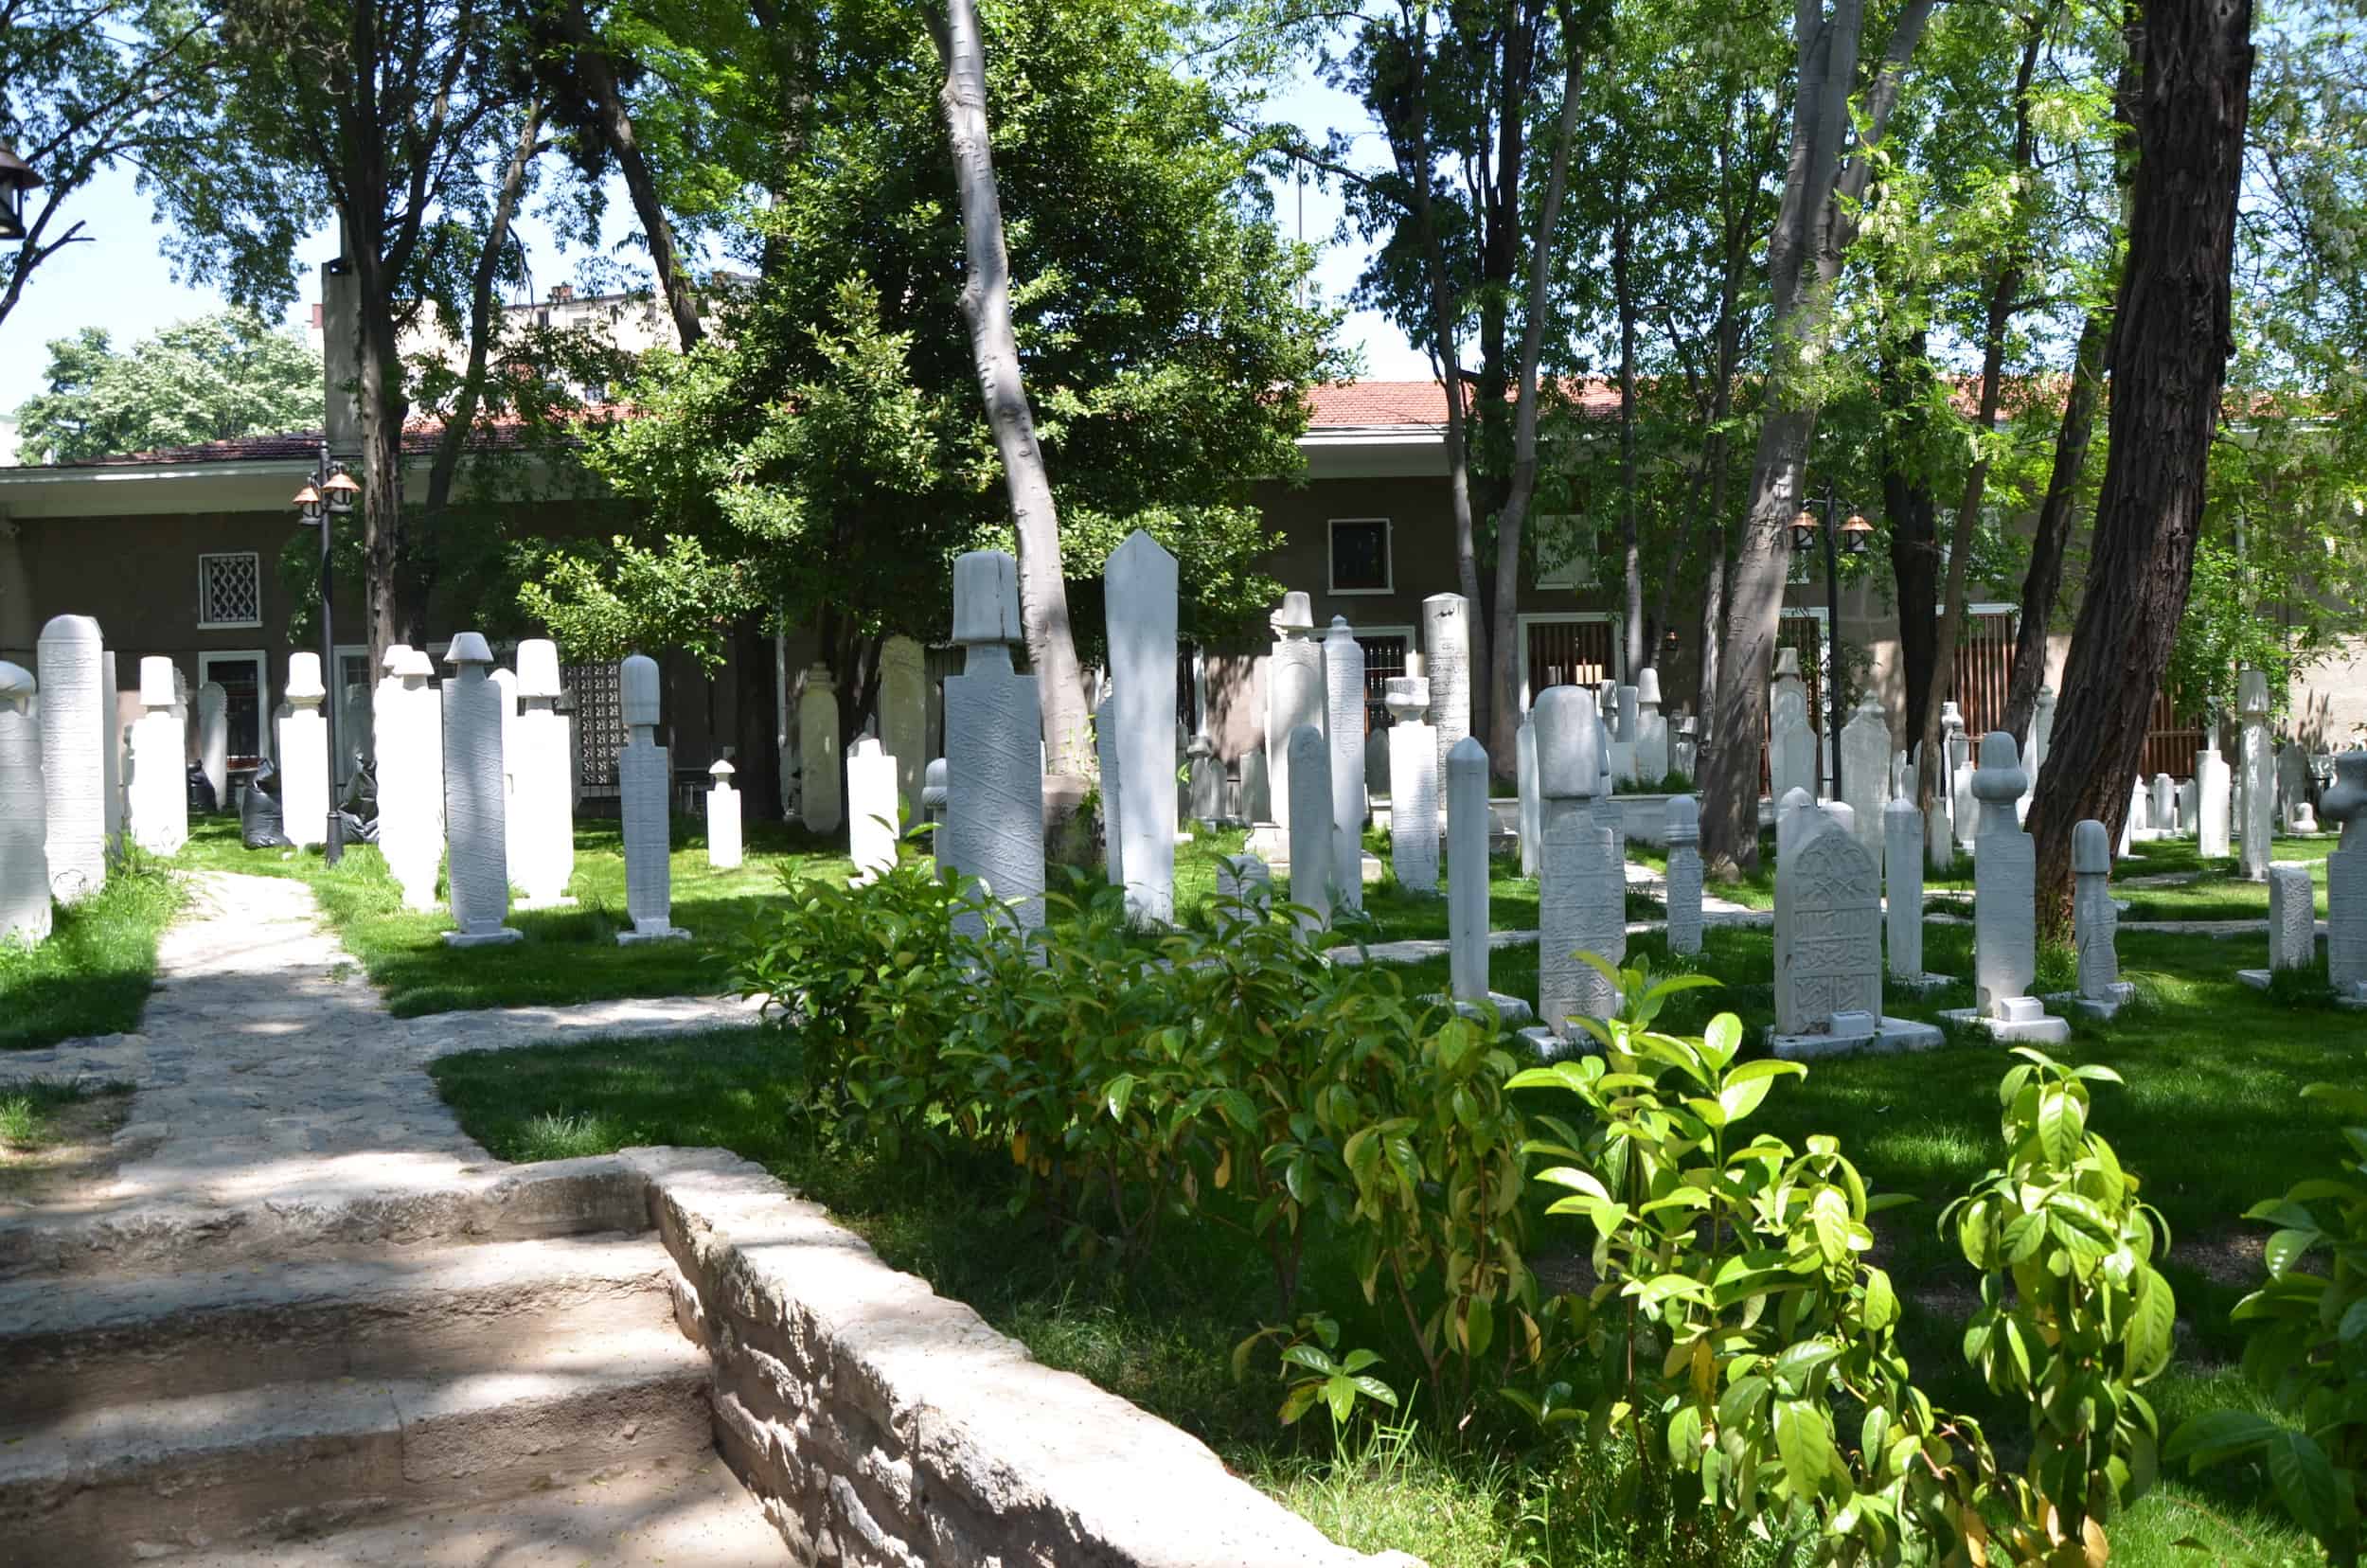 Cemetery at the Galata Mevlevi Lodge Museum in Istanbul, Turkey